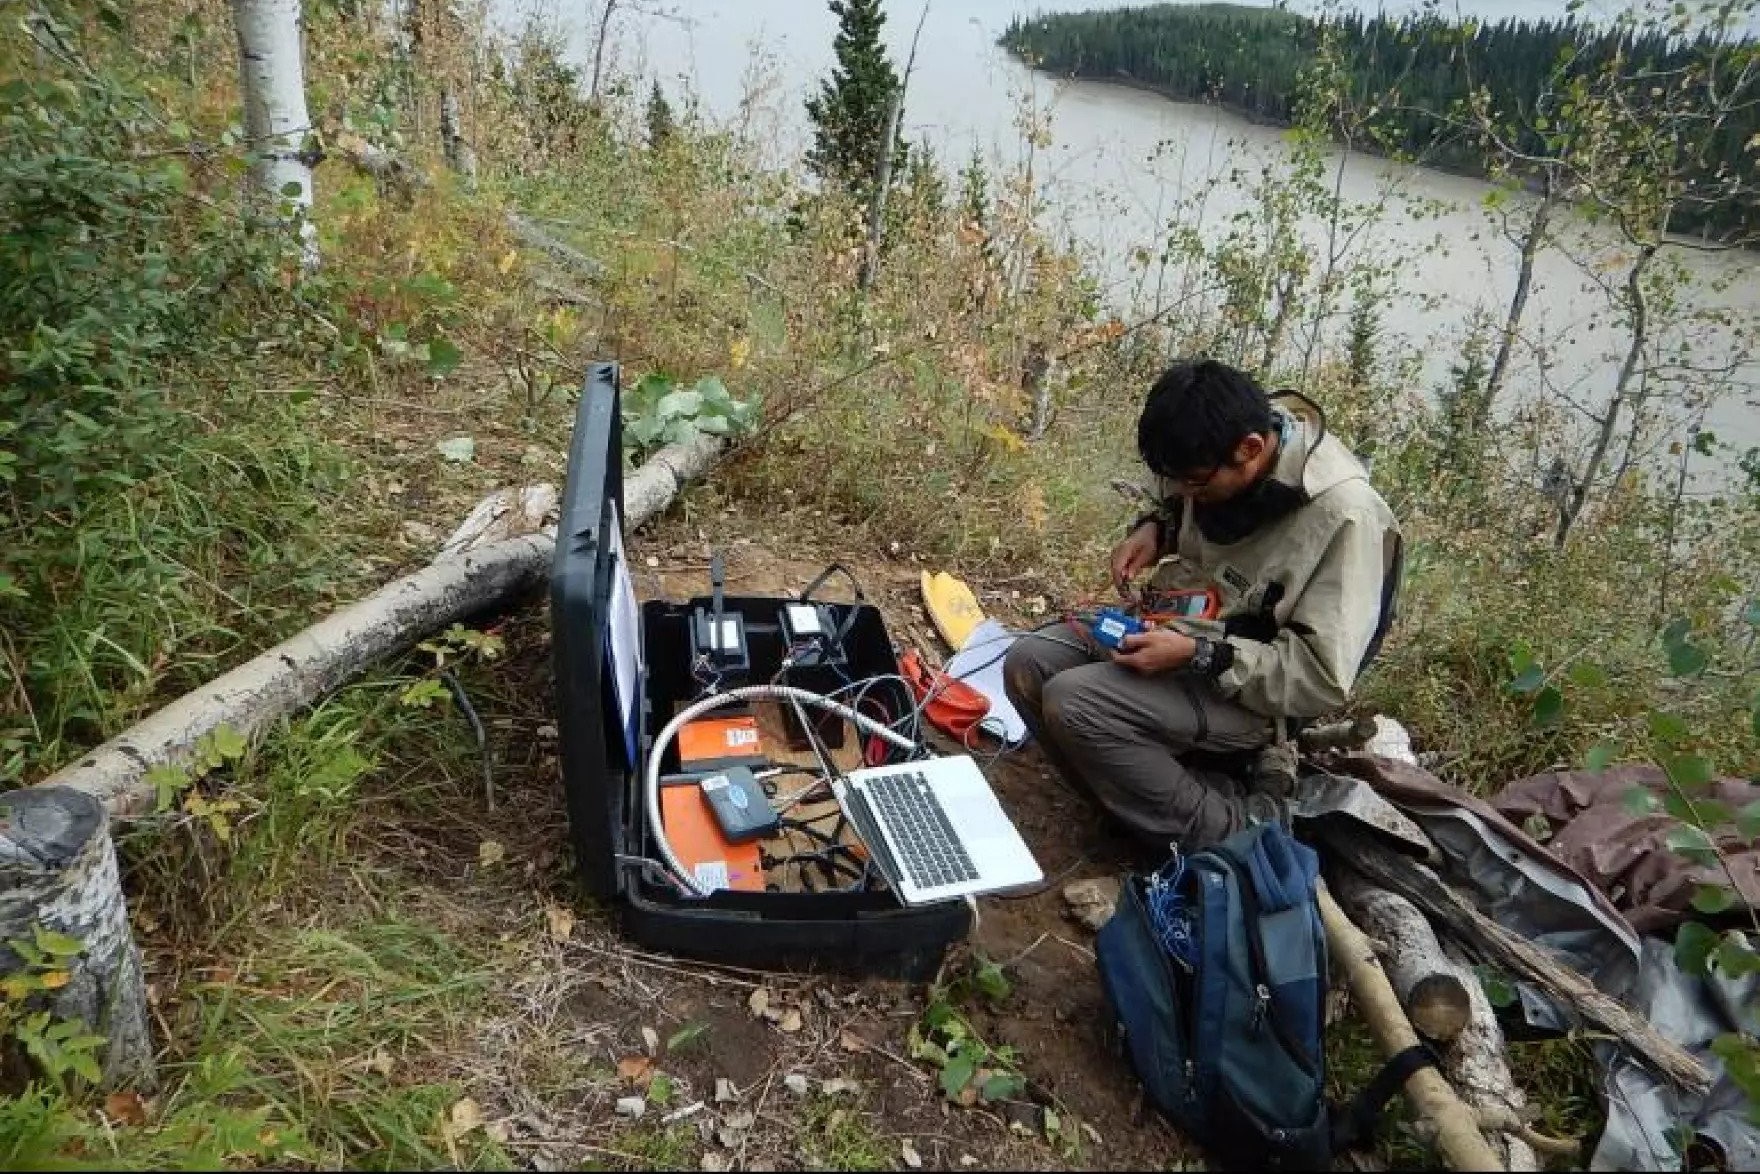 a person works at a computer outside, with other equipment